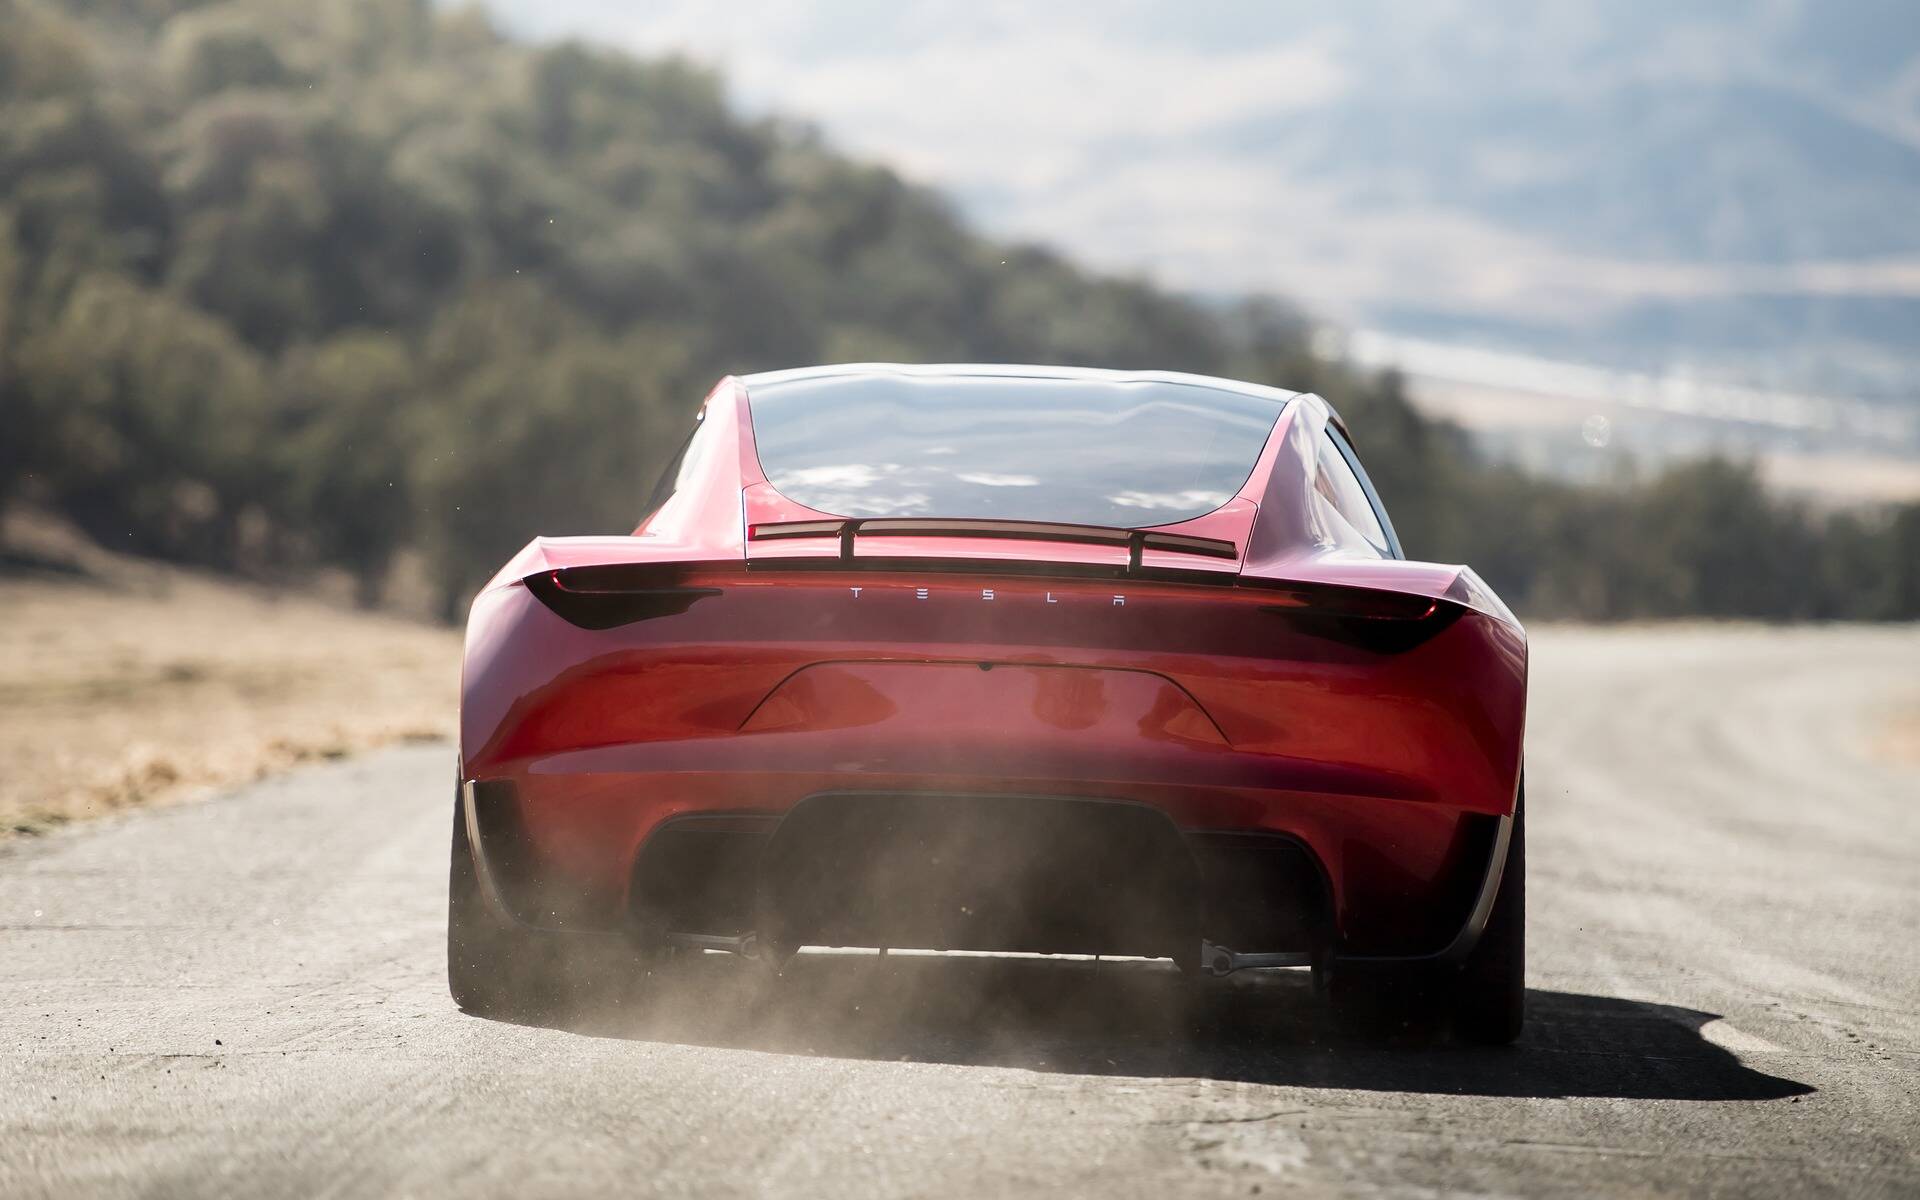 Verstikken Verzorgen actrice This is What a Tesla Roadster Hitting 100 km/h in 1.1 Second Looks Like -  The Car Guide